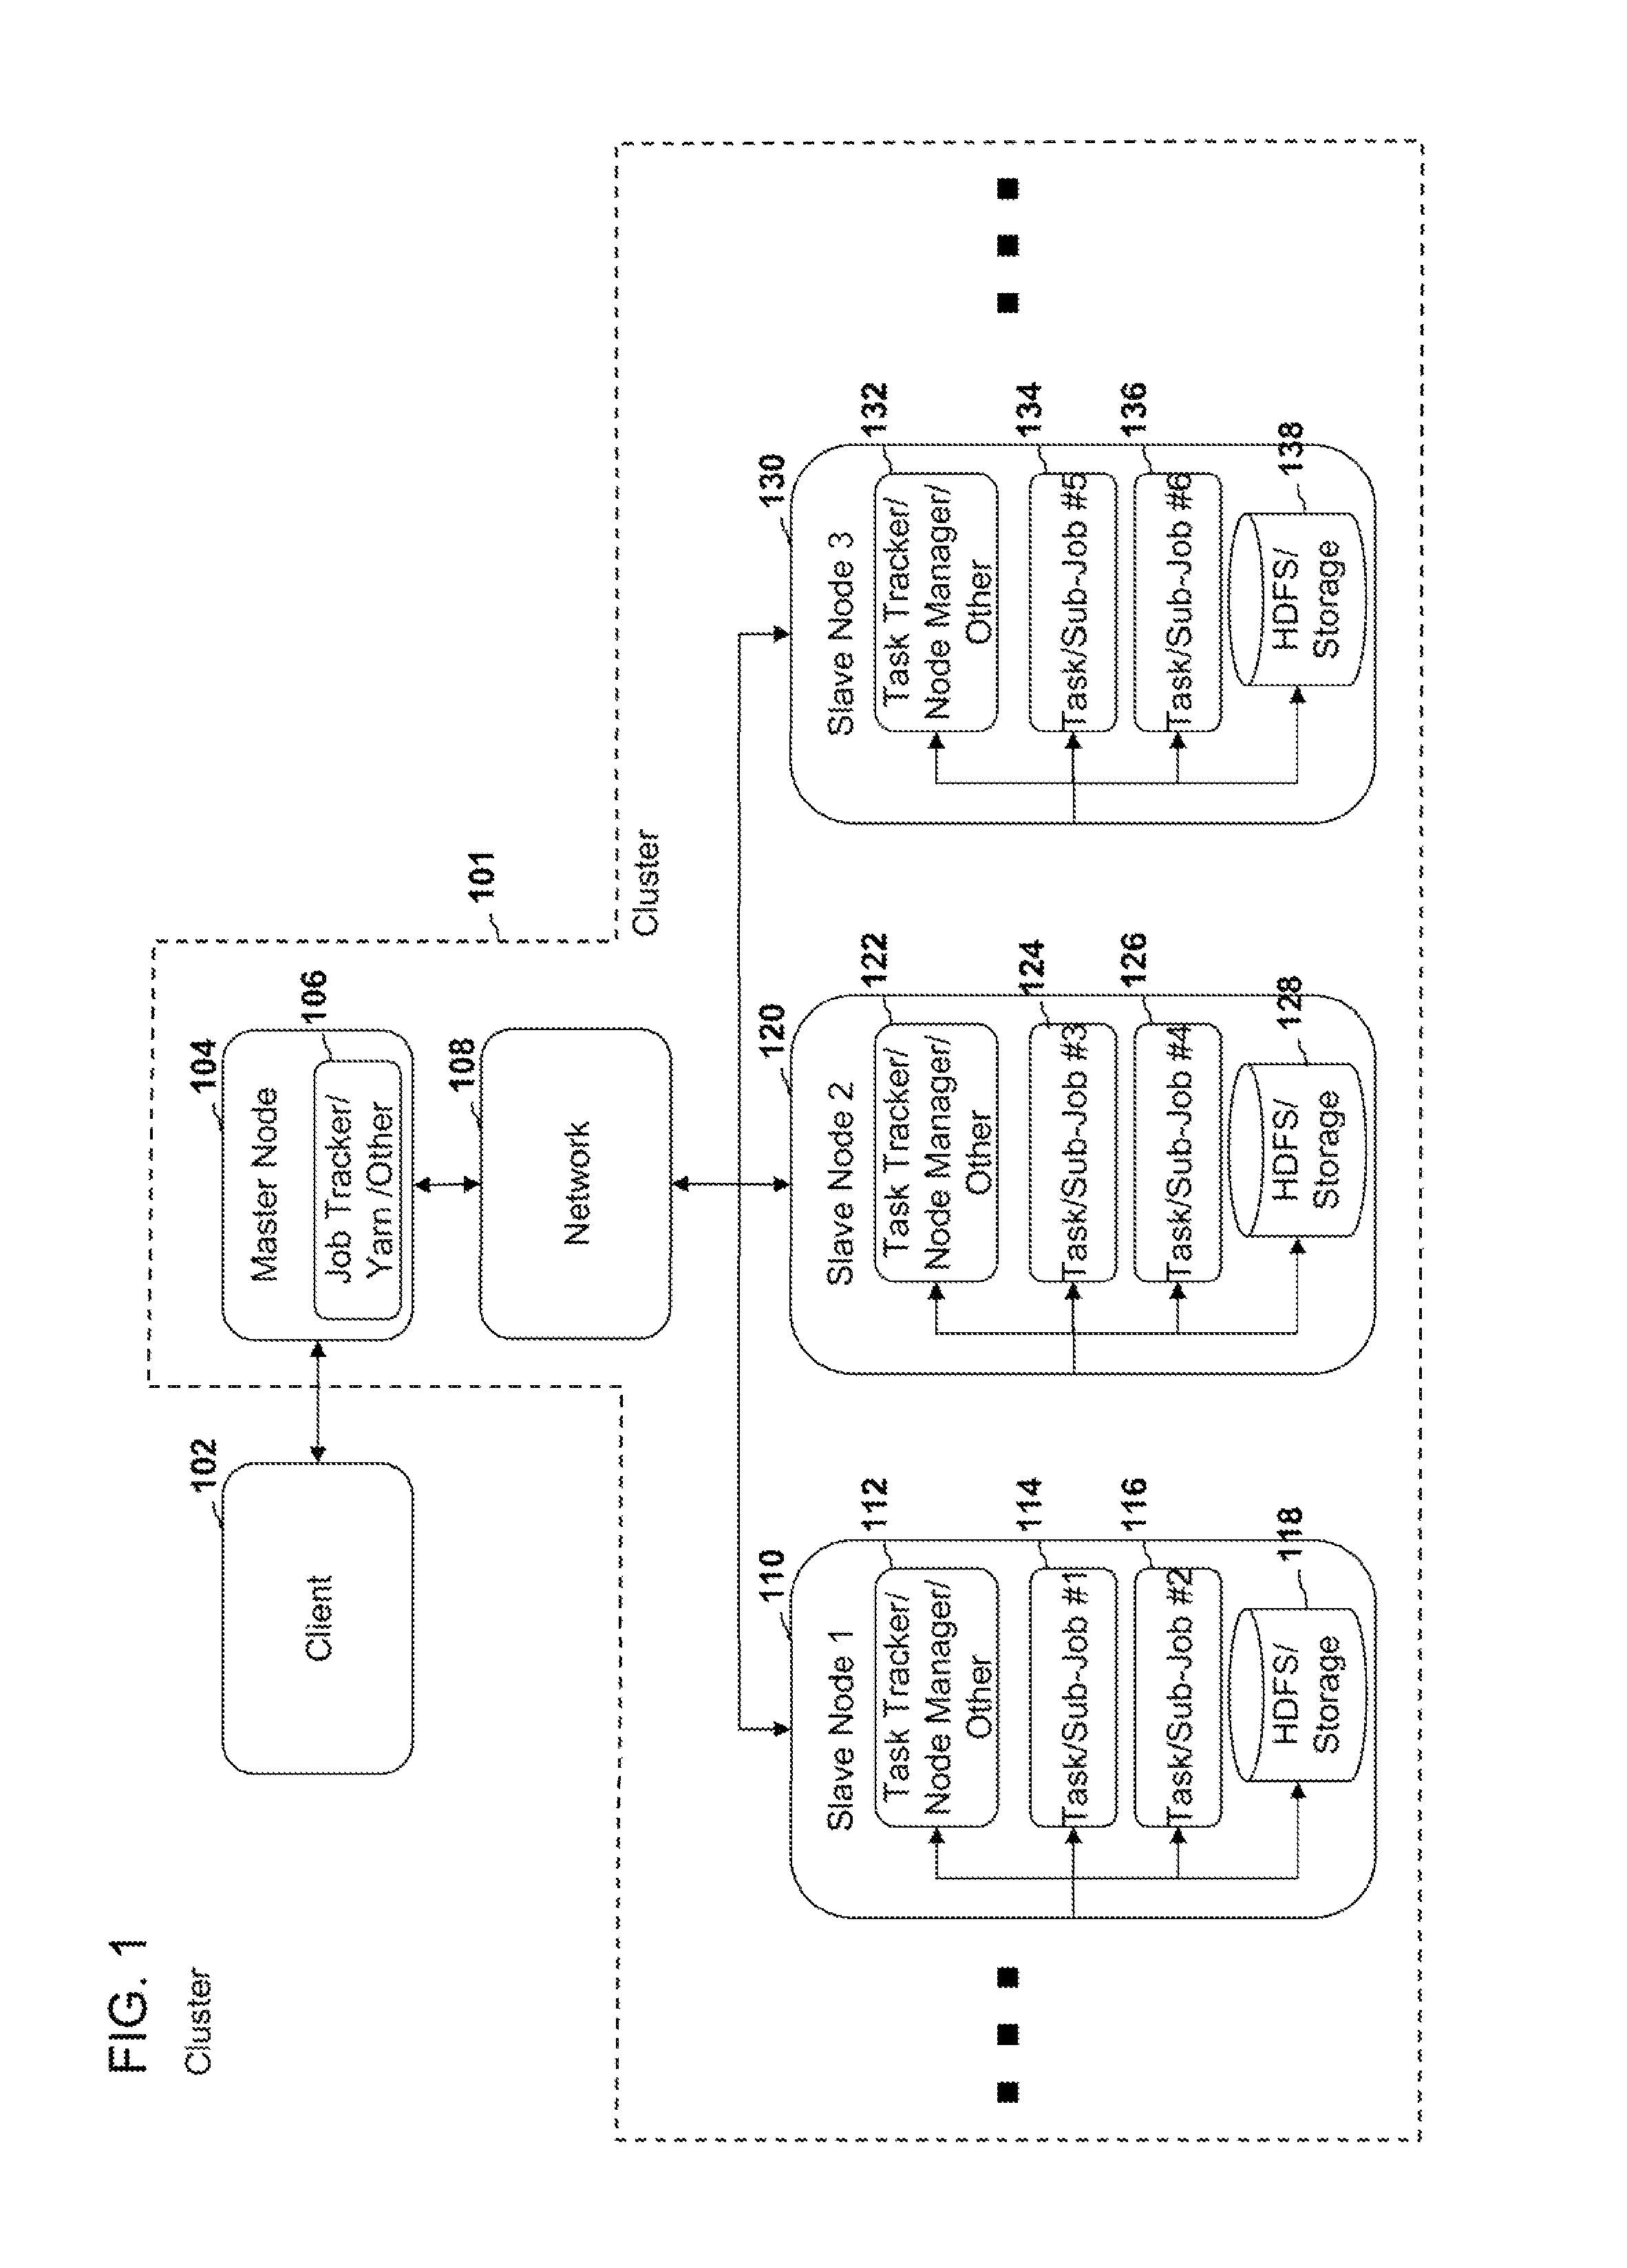 Systems, methods, and devices for dynamic resource monitoring and allocation in a cluster system